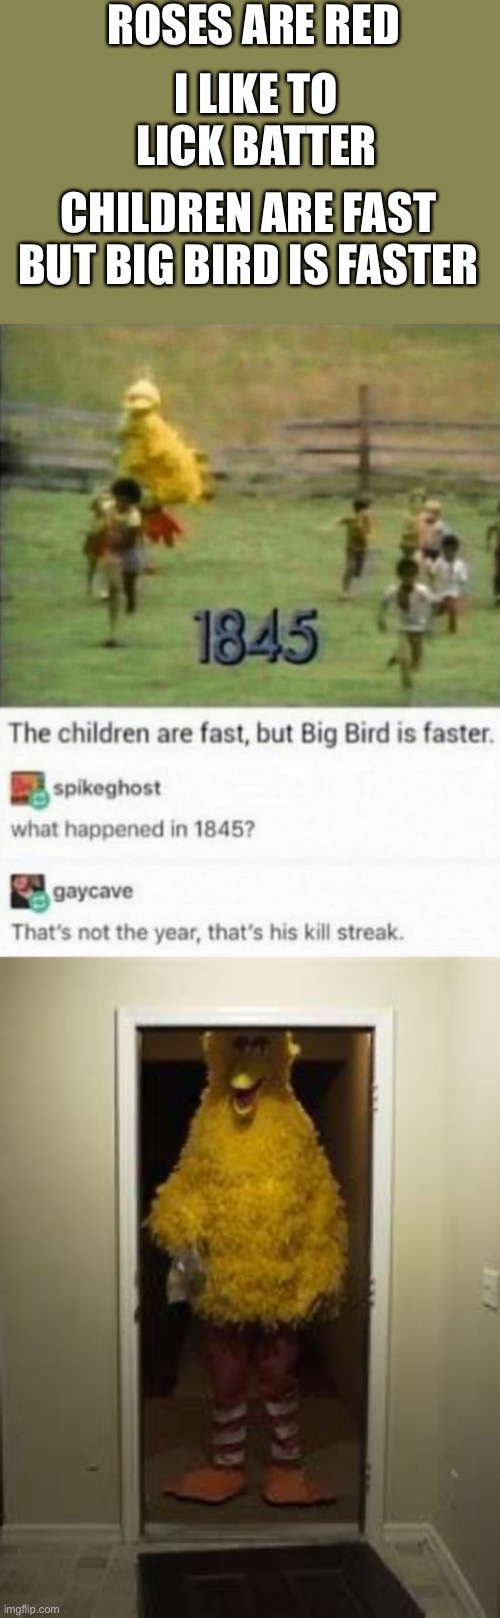 Elmo’s is larger | ROSES ARE RED; I LIKE TO LICK BATTER; CHILDREN ARE FAST BUT BIG BIRD IS FASTER | image tagged in big bird door | made w/ Imgflip meme maker